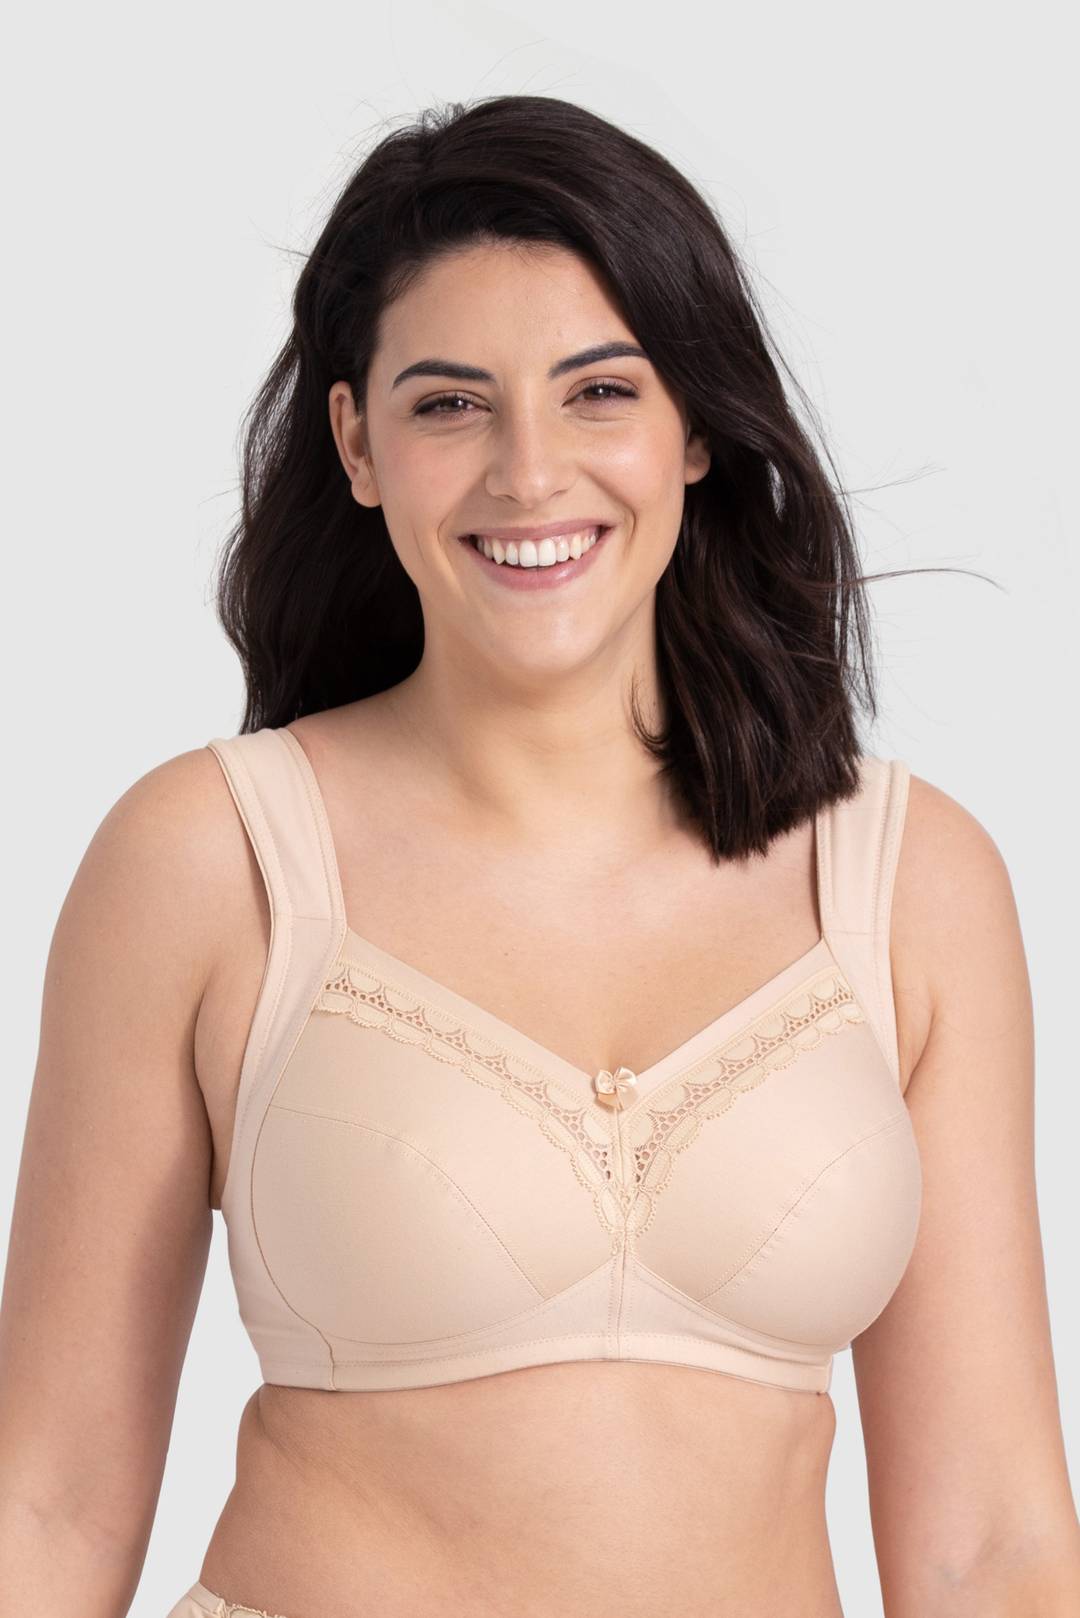 38-46 Feather Plus Size Cotton Bra Non-Wire Thin Sponge Full Cup Bra C Cup  Bra Size Besar @Ready Stock KL Malaysia #838